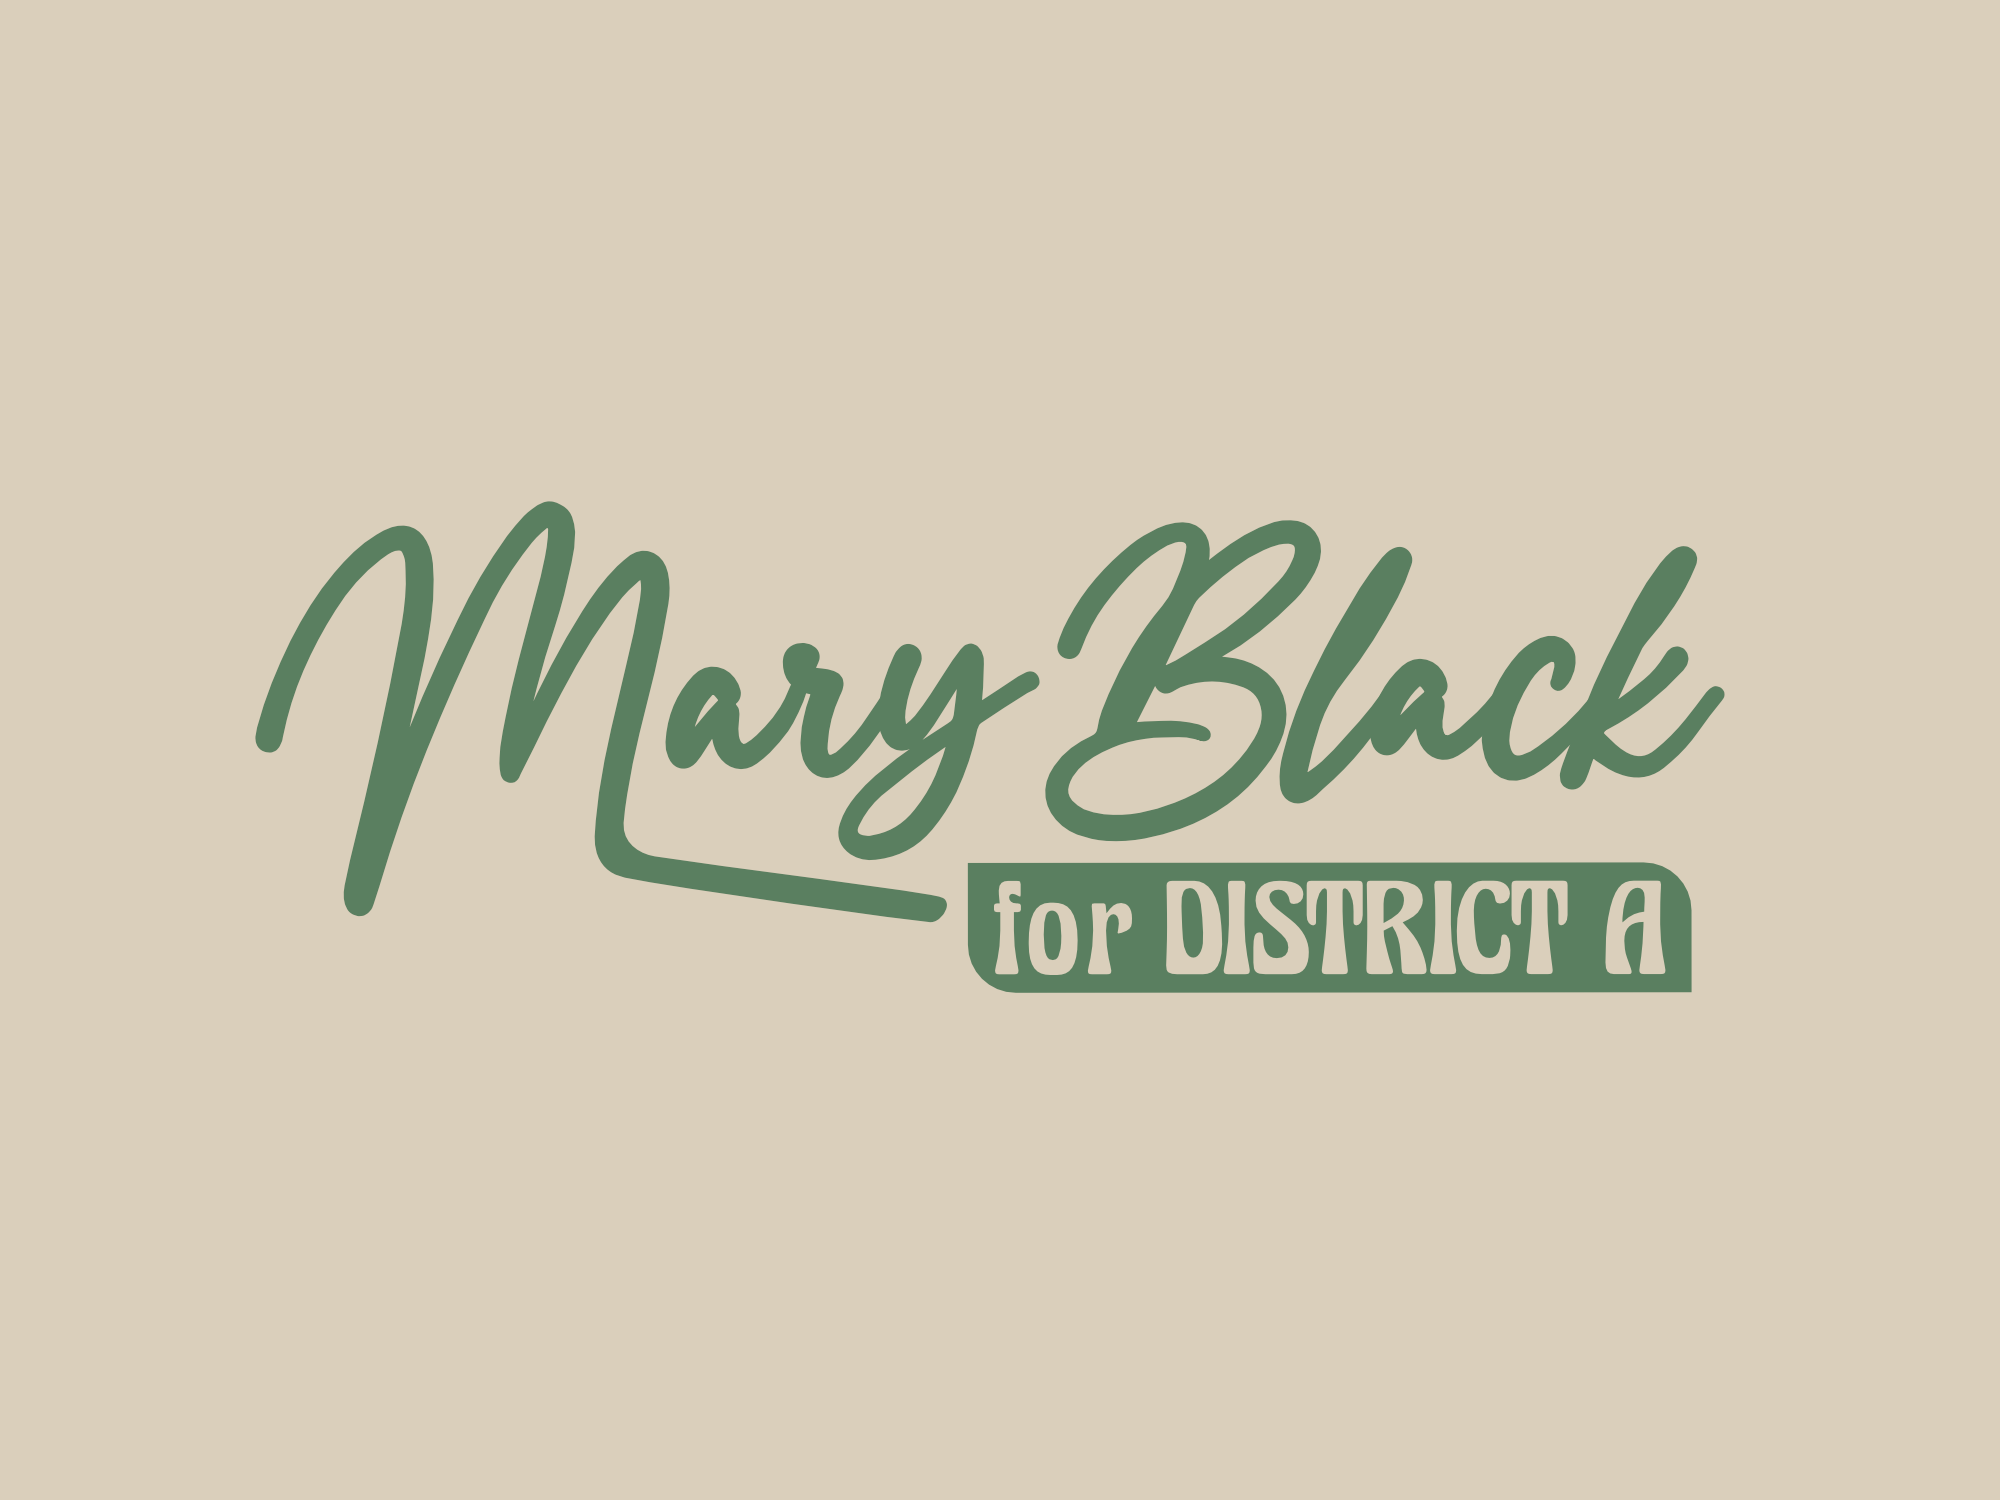 Mary for District A logo